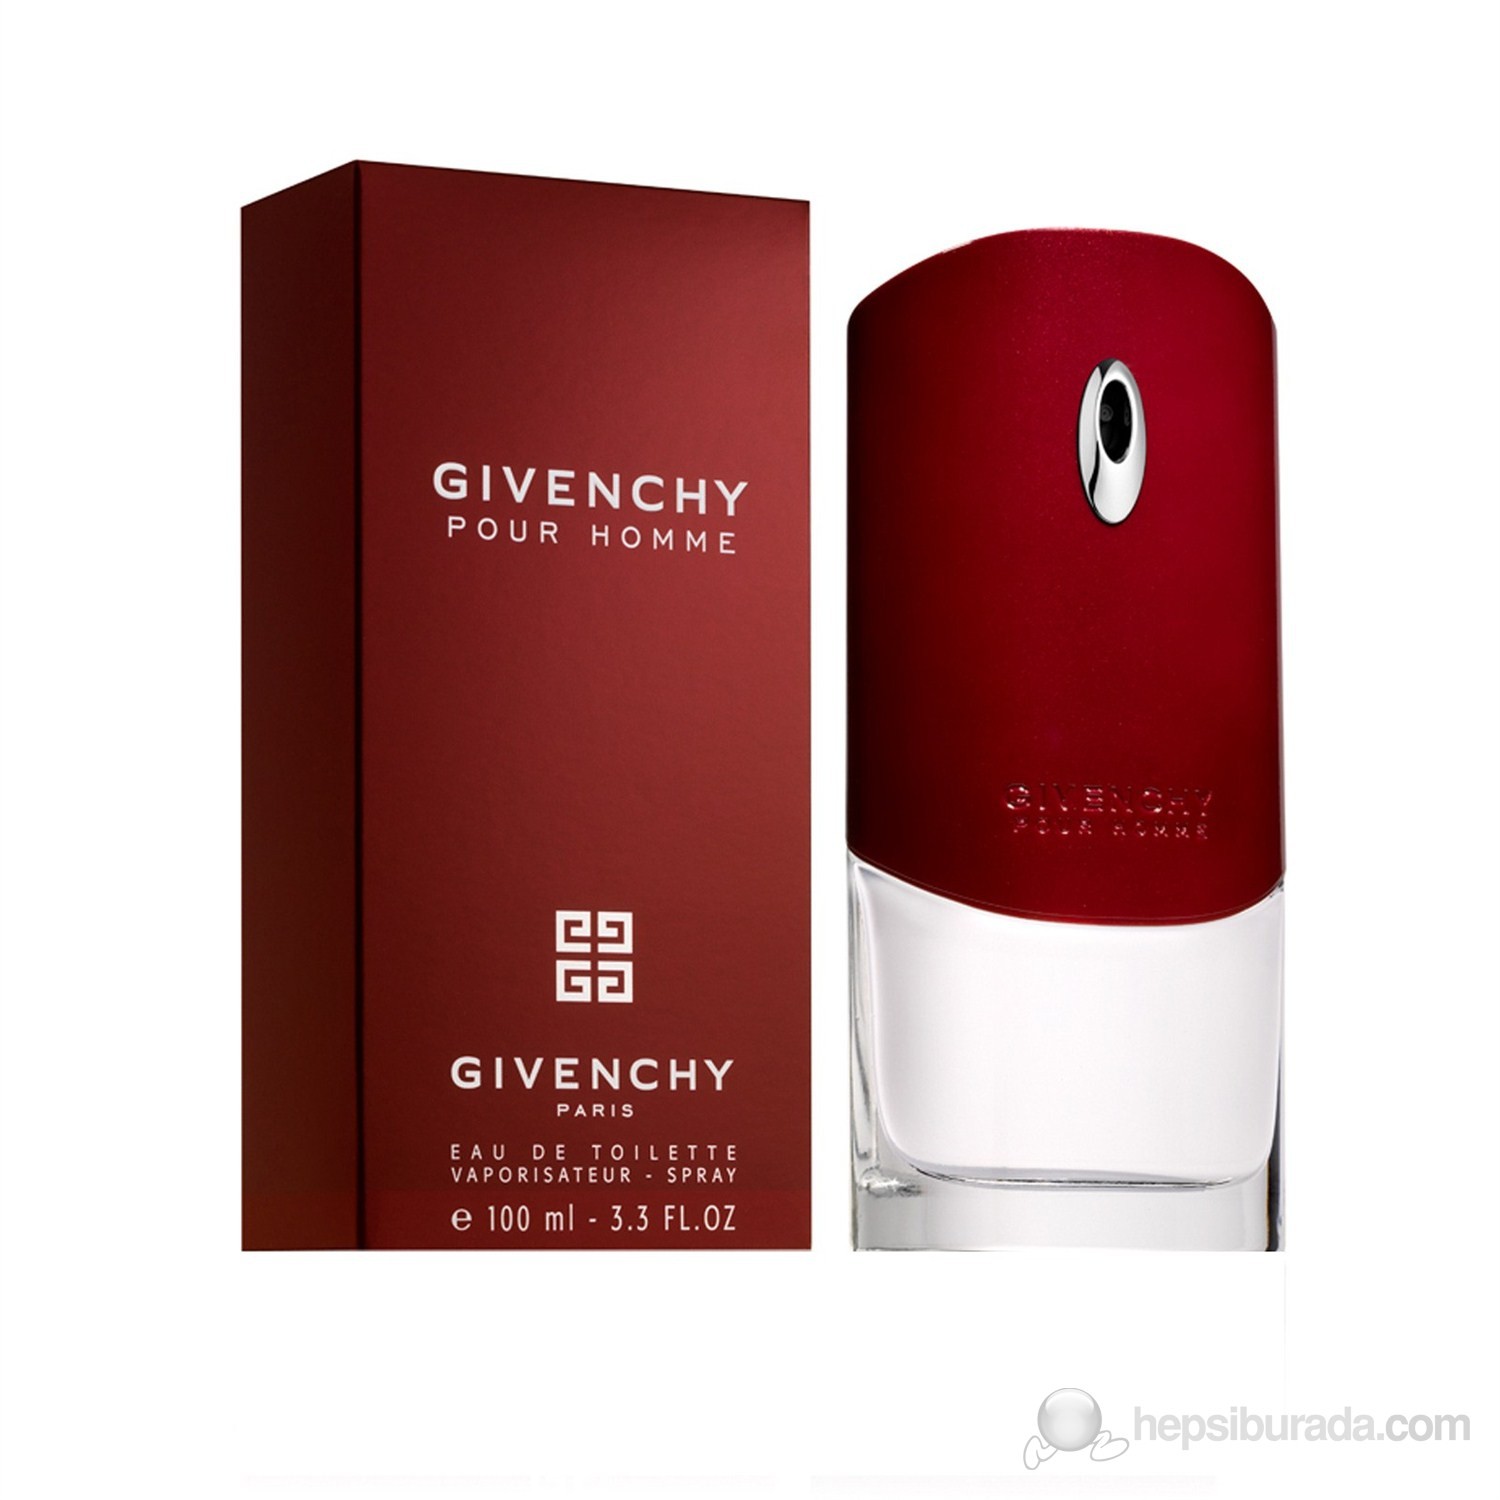 Живанши мужские летуаль. Givenchy "pour homme" EDT, 100ml. Givenchy pour homme men 100ml EDT. Givenchy pour homme men 100ml EDT 3274870303166. Givenchy pour homme 100ml оригинал.